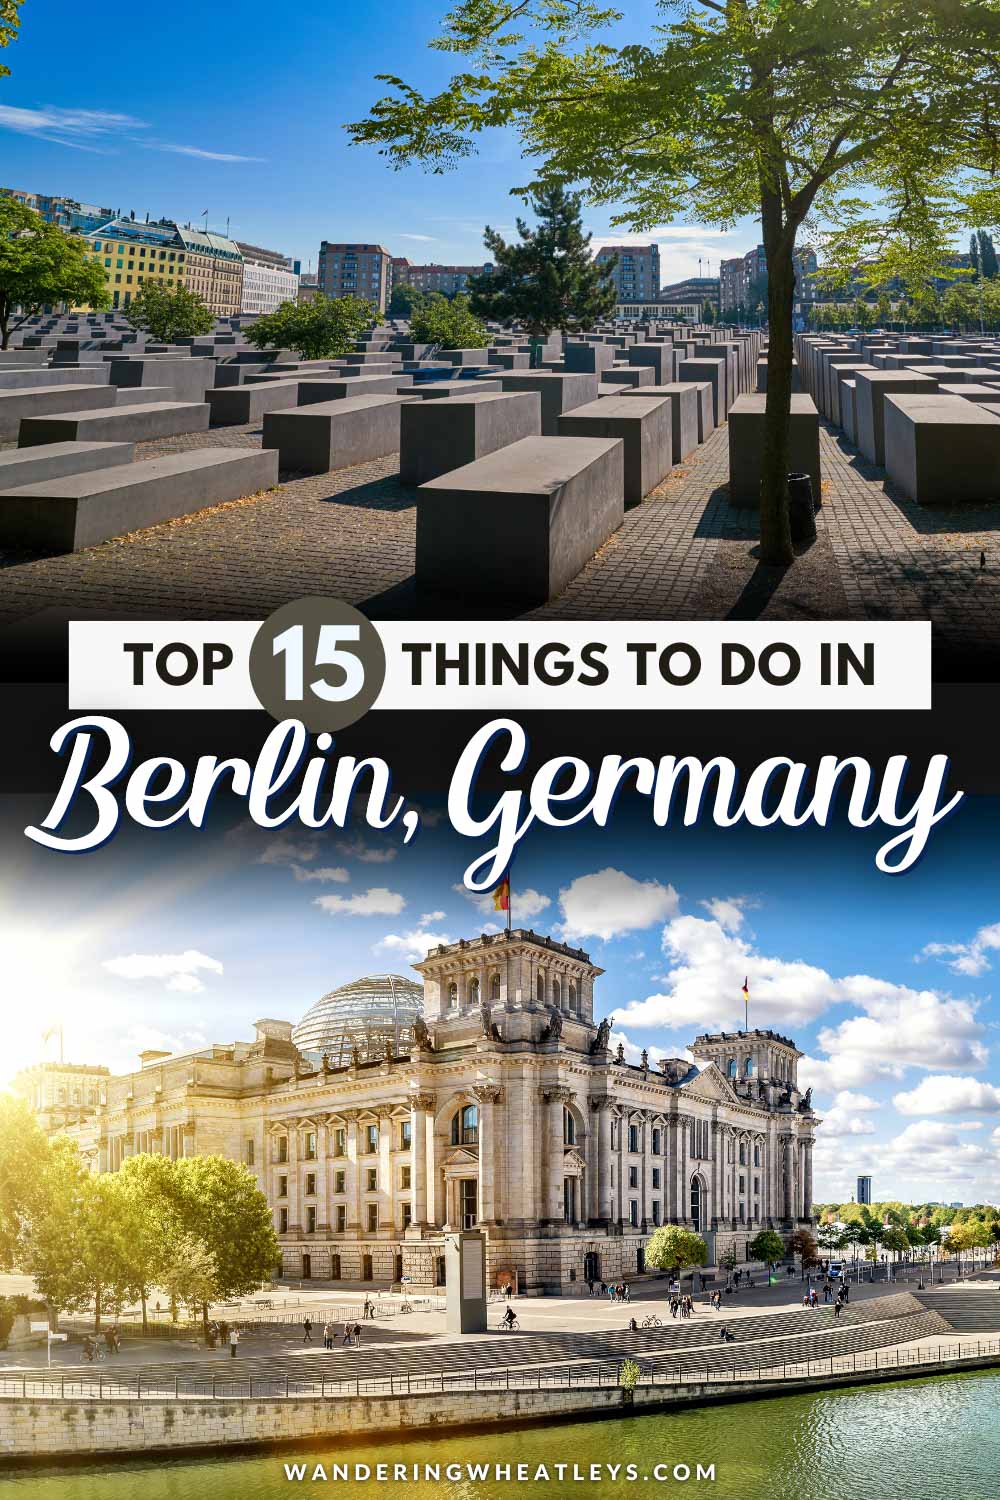 The Best Things to do in Berlin